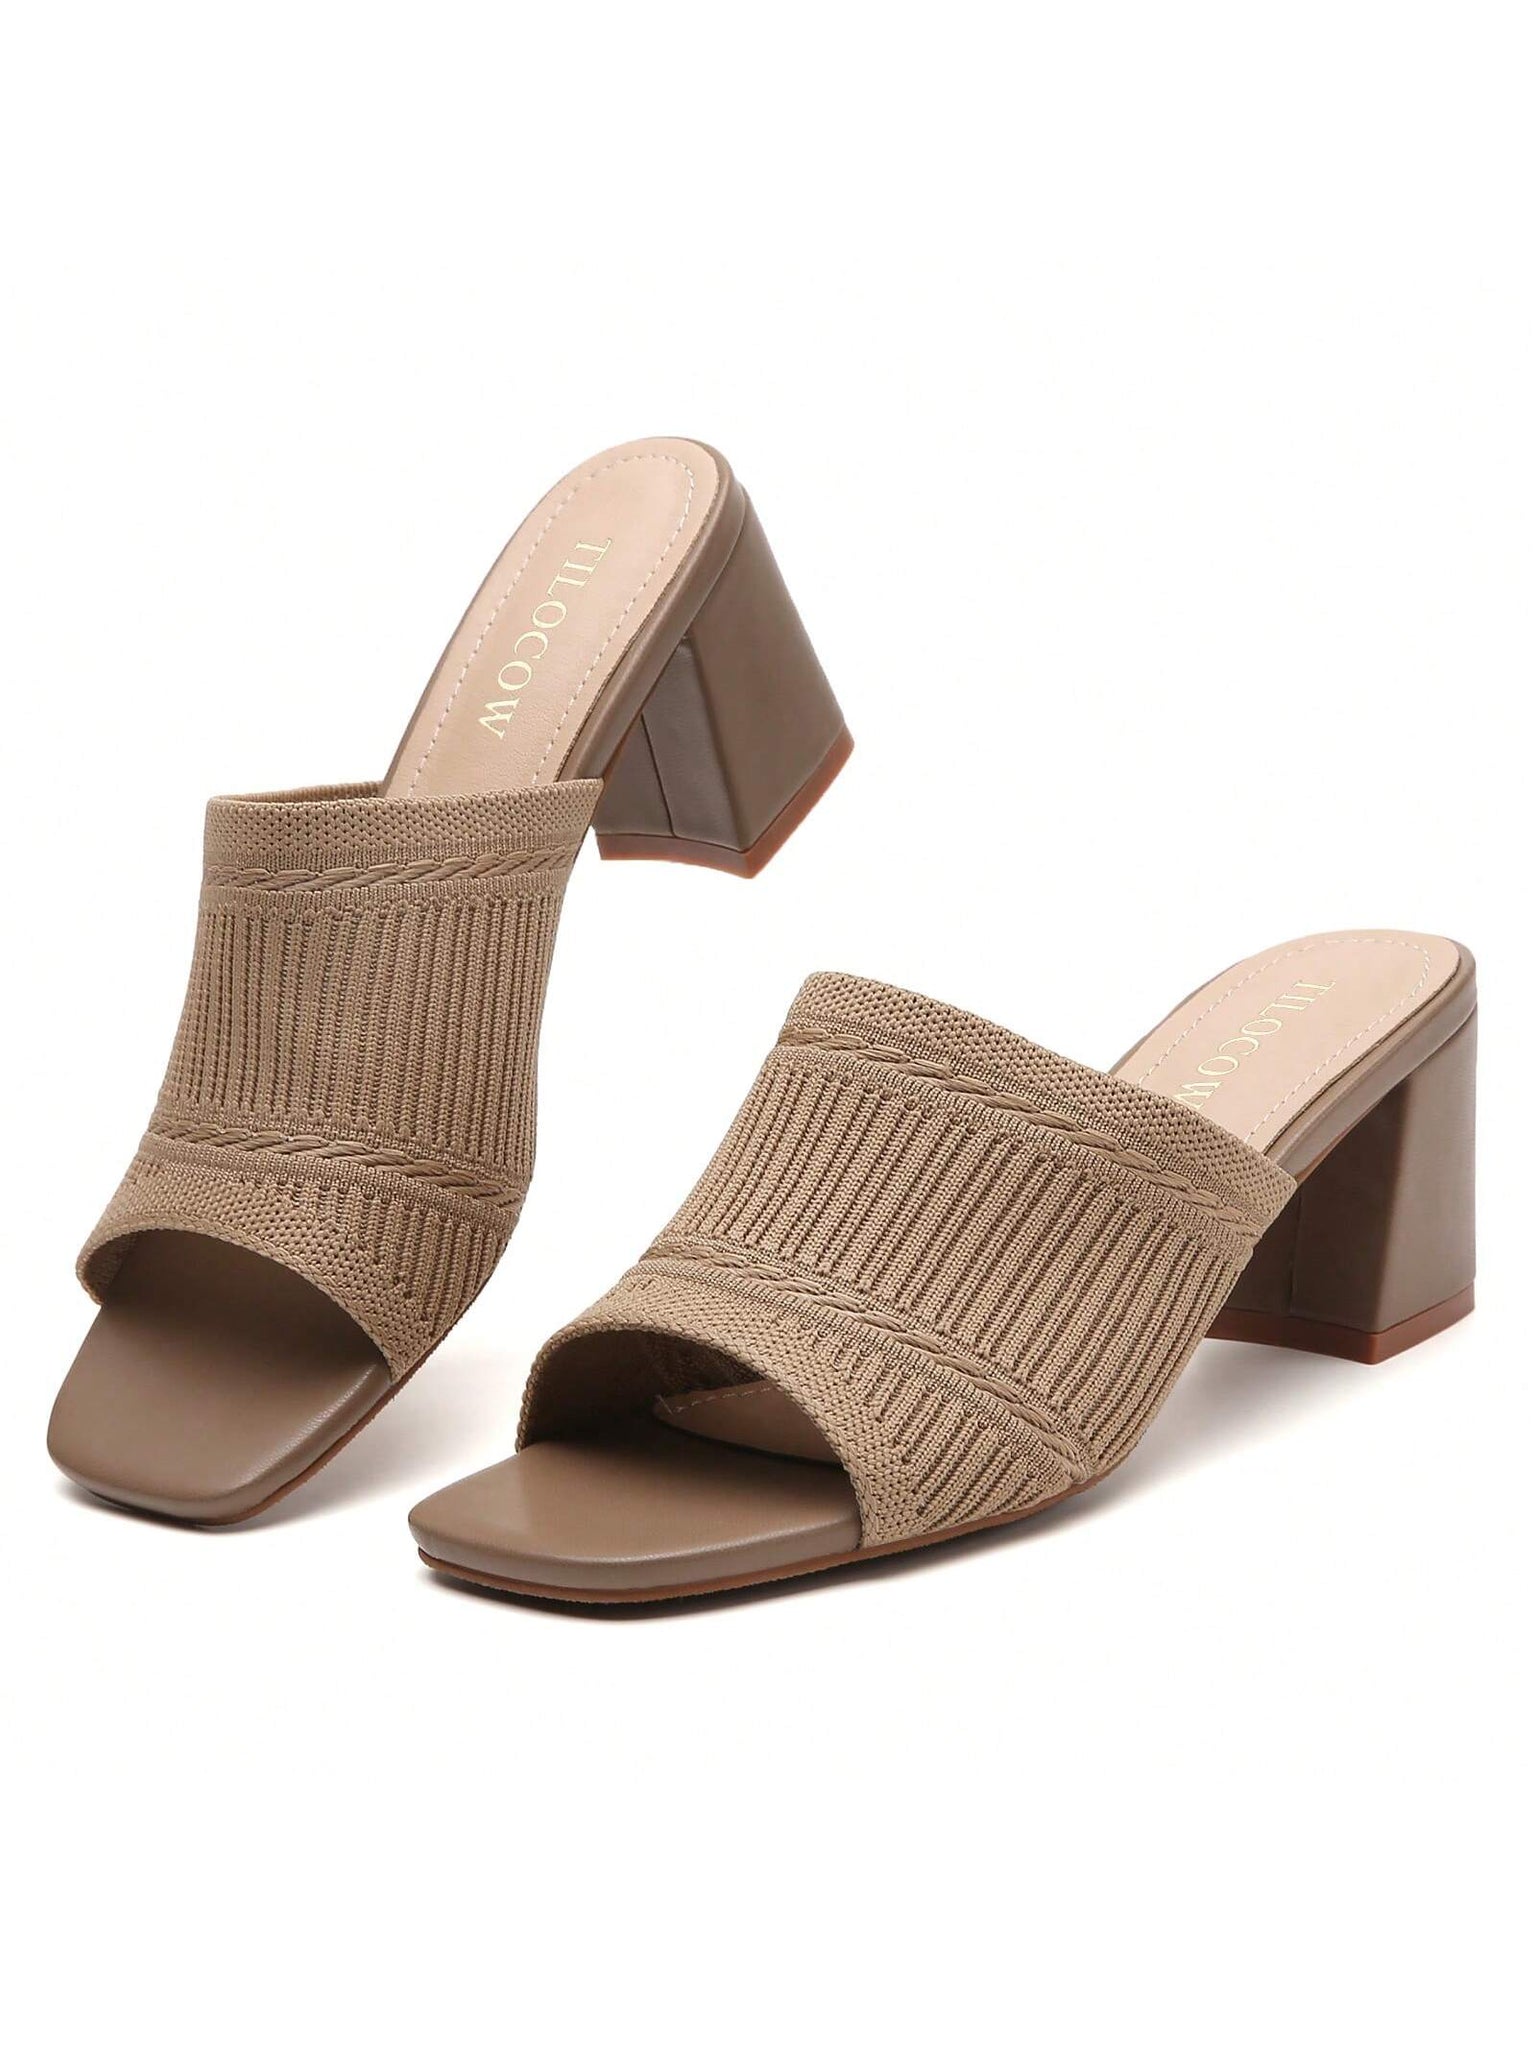 Tilocow Knit Heeled Sandals Chunky Low Block Heel Mules For Women Square Open Toe Heels Slip On Breathable Slides Sandal-Brown-2